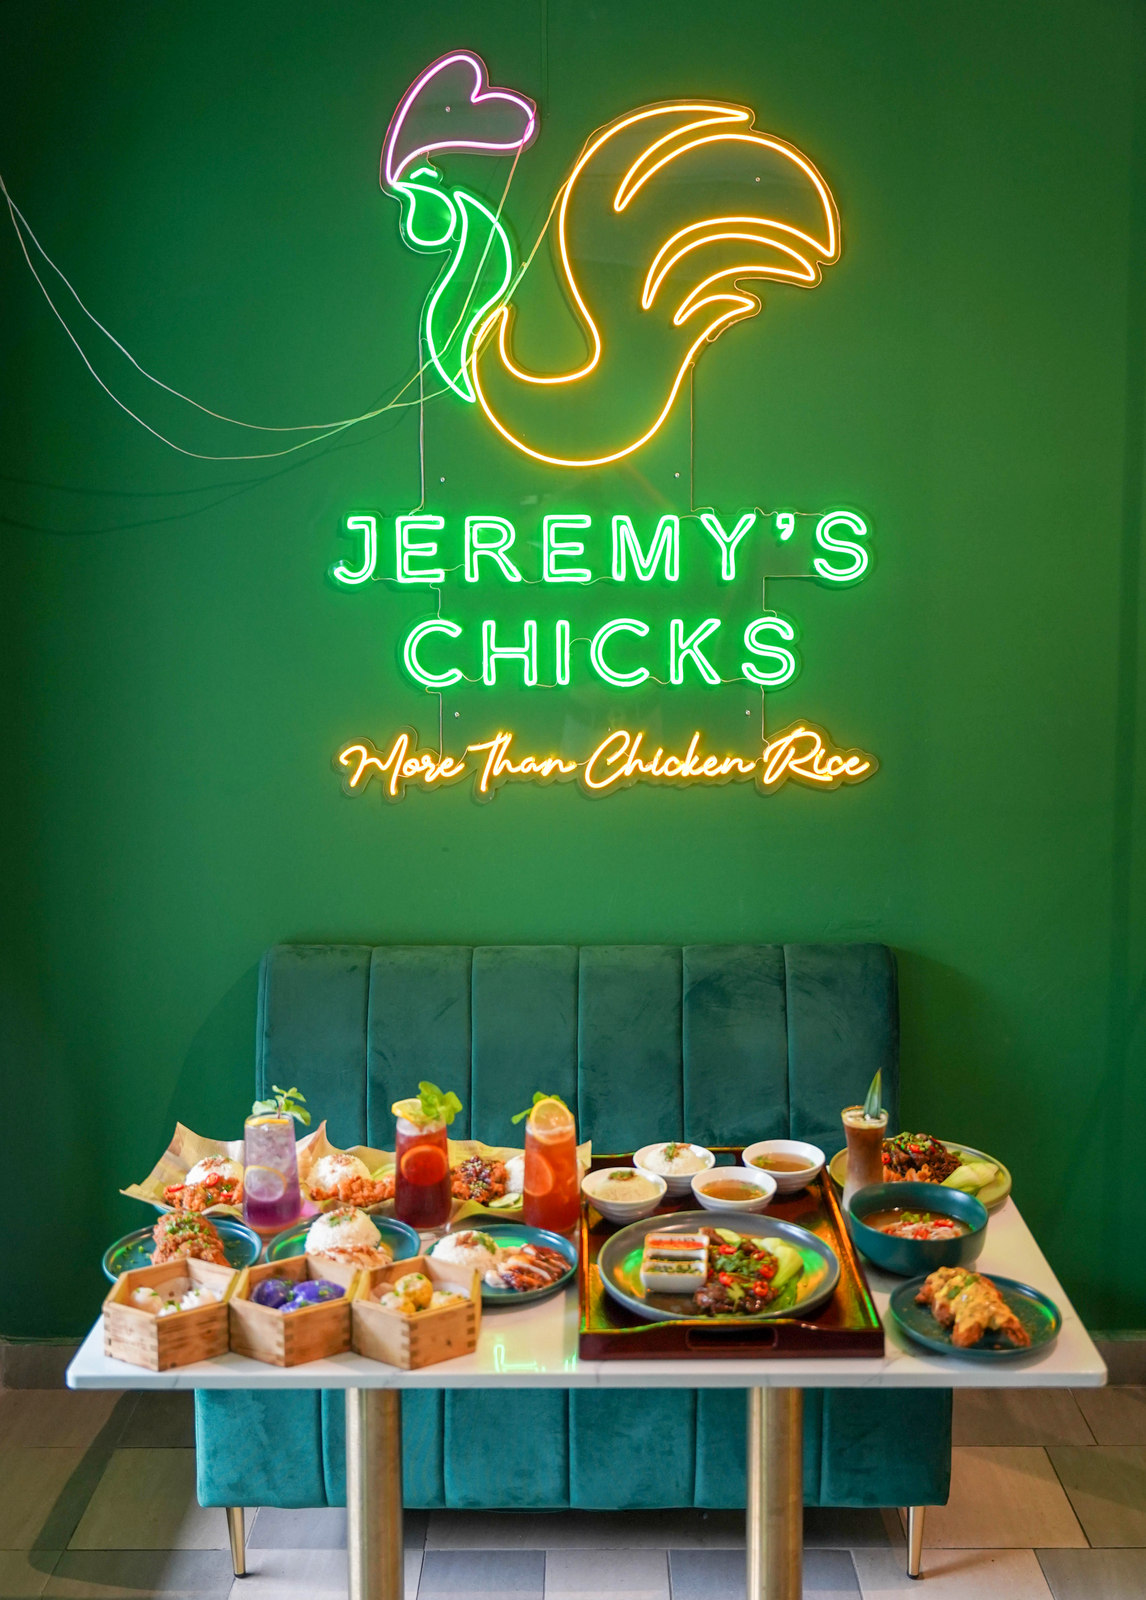 jeremy's chicks: subang's wallet-friendly spot for all things chicken, from bbq to poached & roasted, crispy-fried to cheesy 